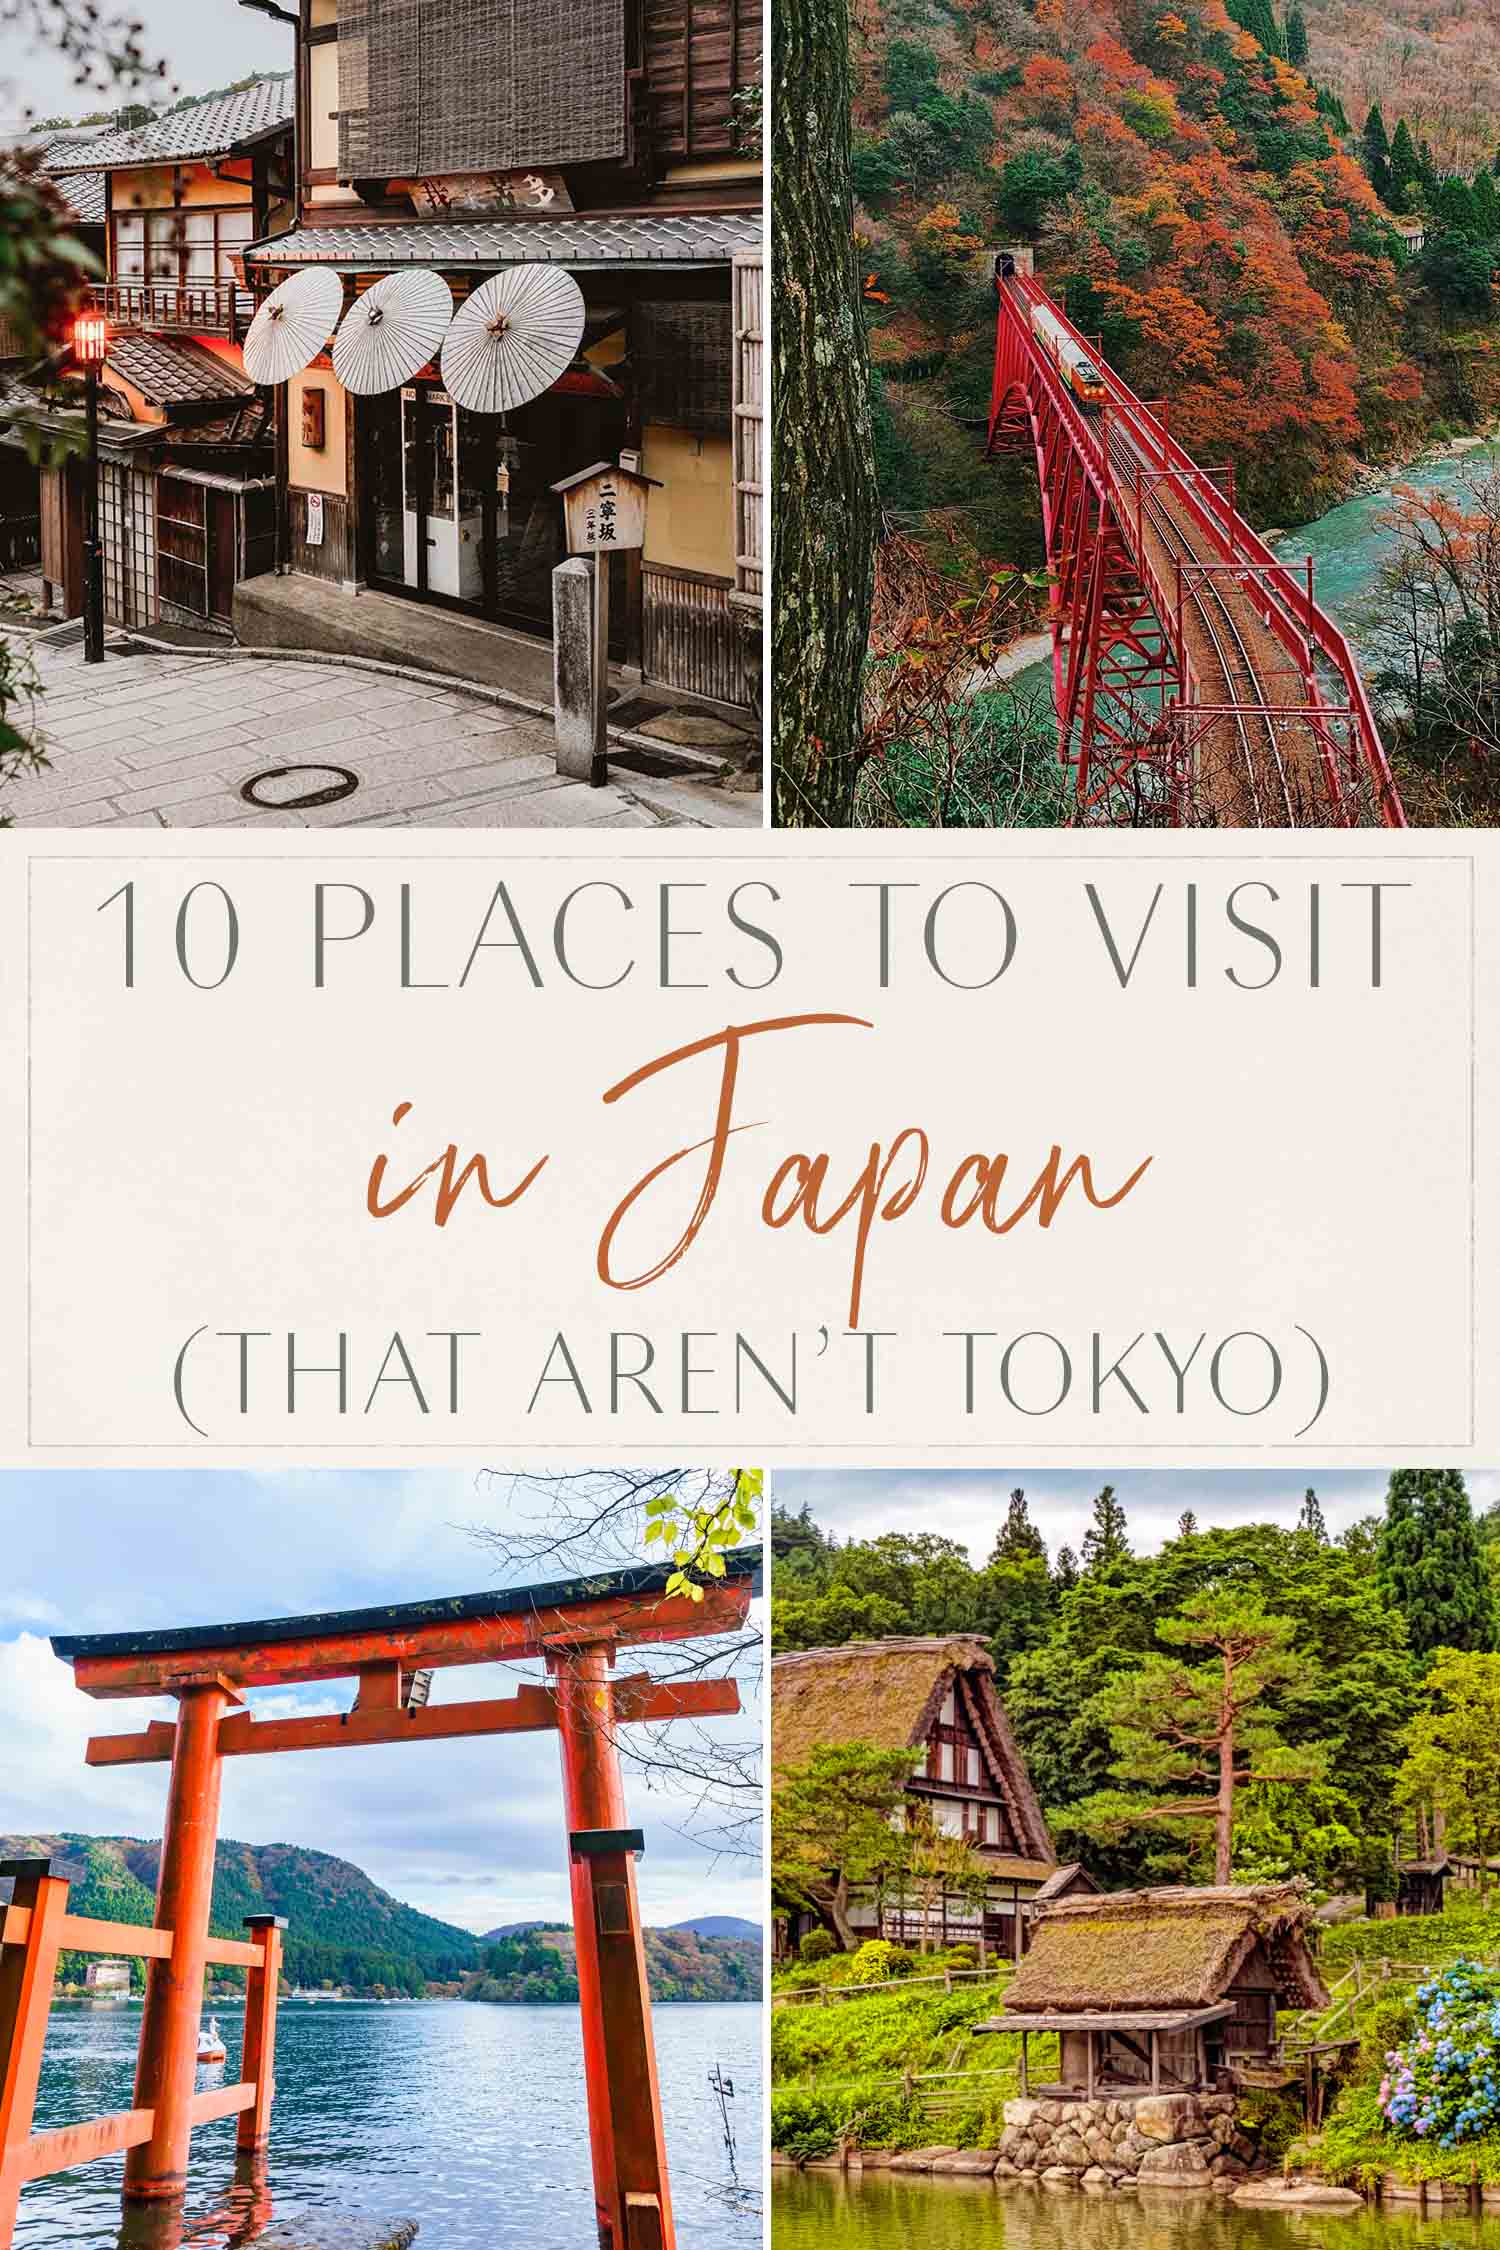 10 places to visit in Japan, not Tokyo